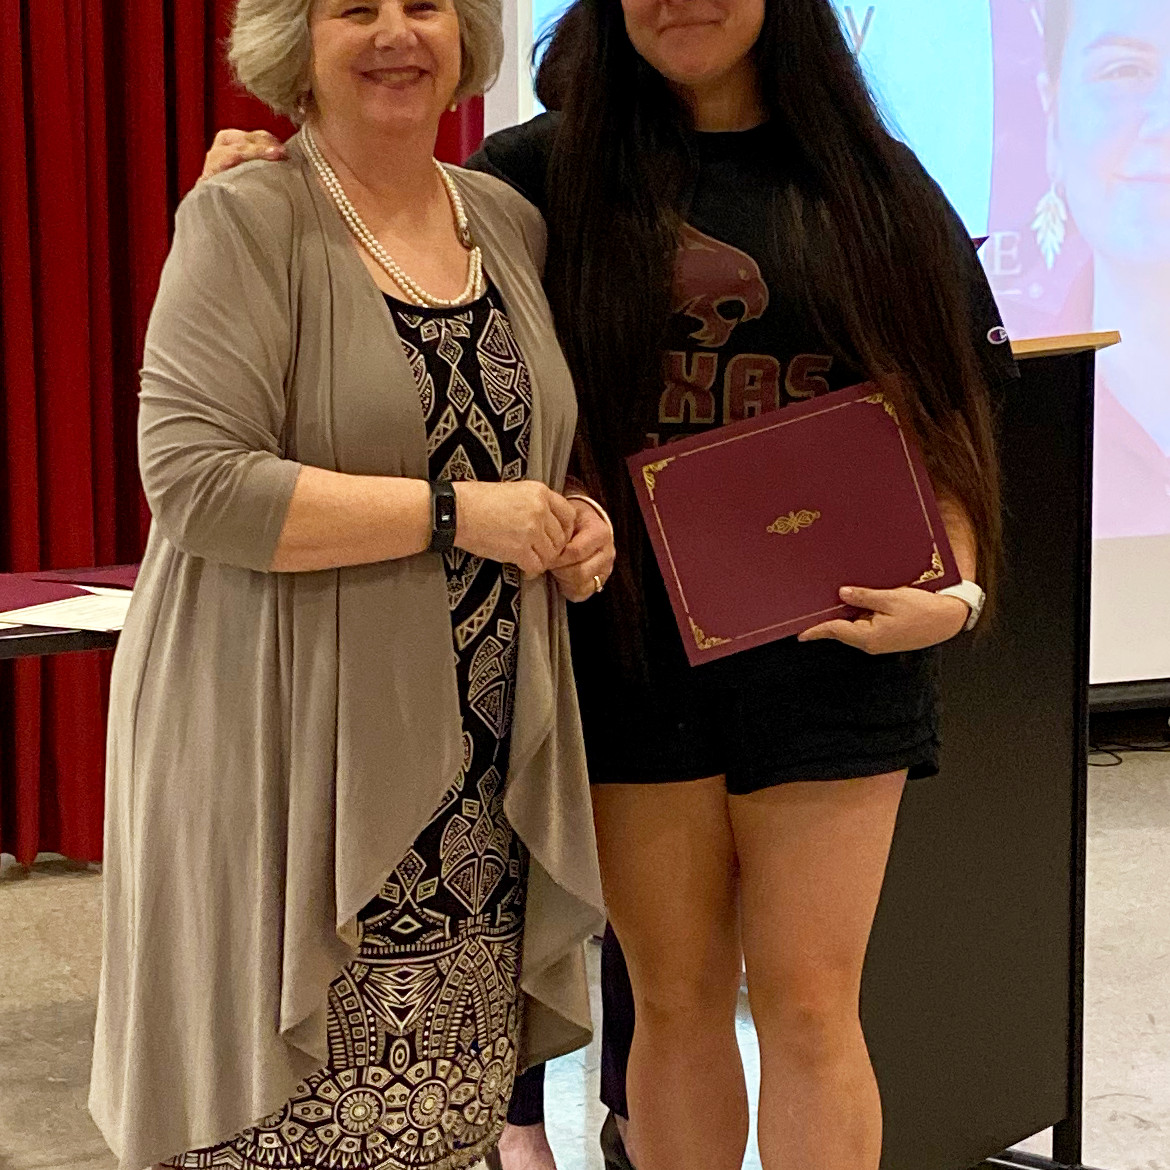 Student receiving an award from faculty